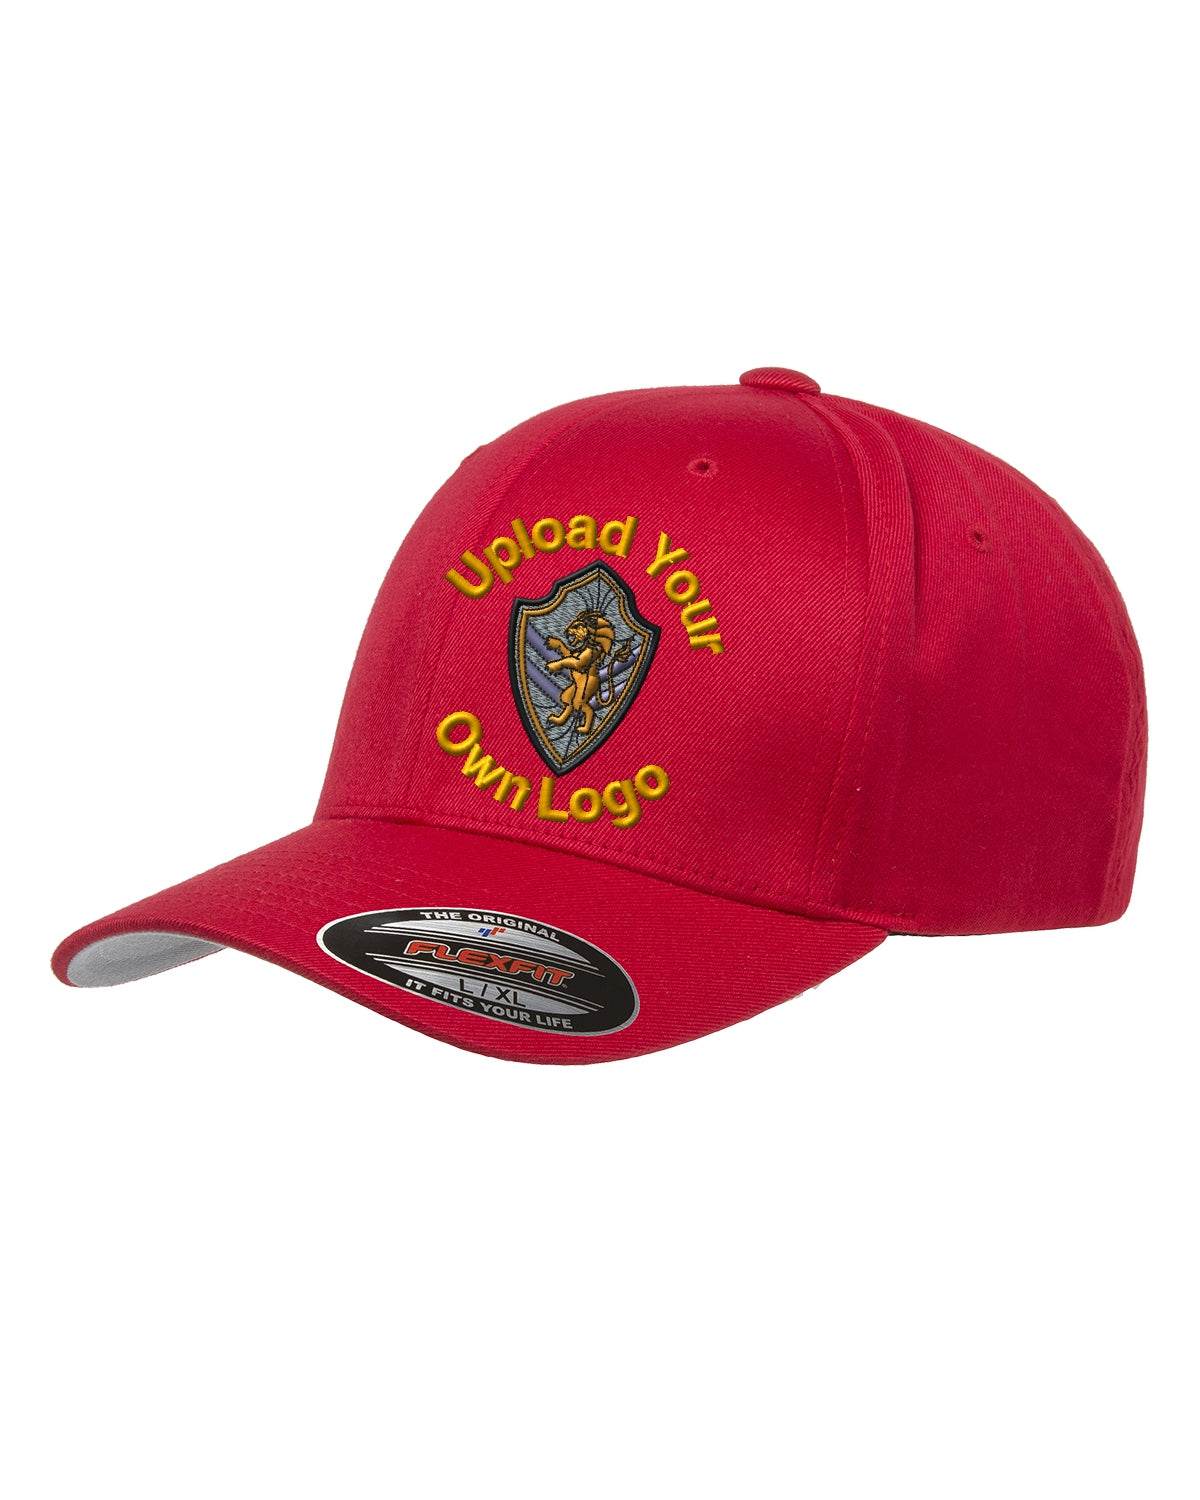 Flex Fitted Ball Cap with Your Company Logo Embroidered - red